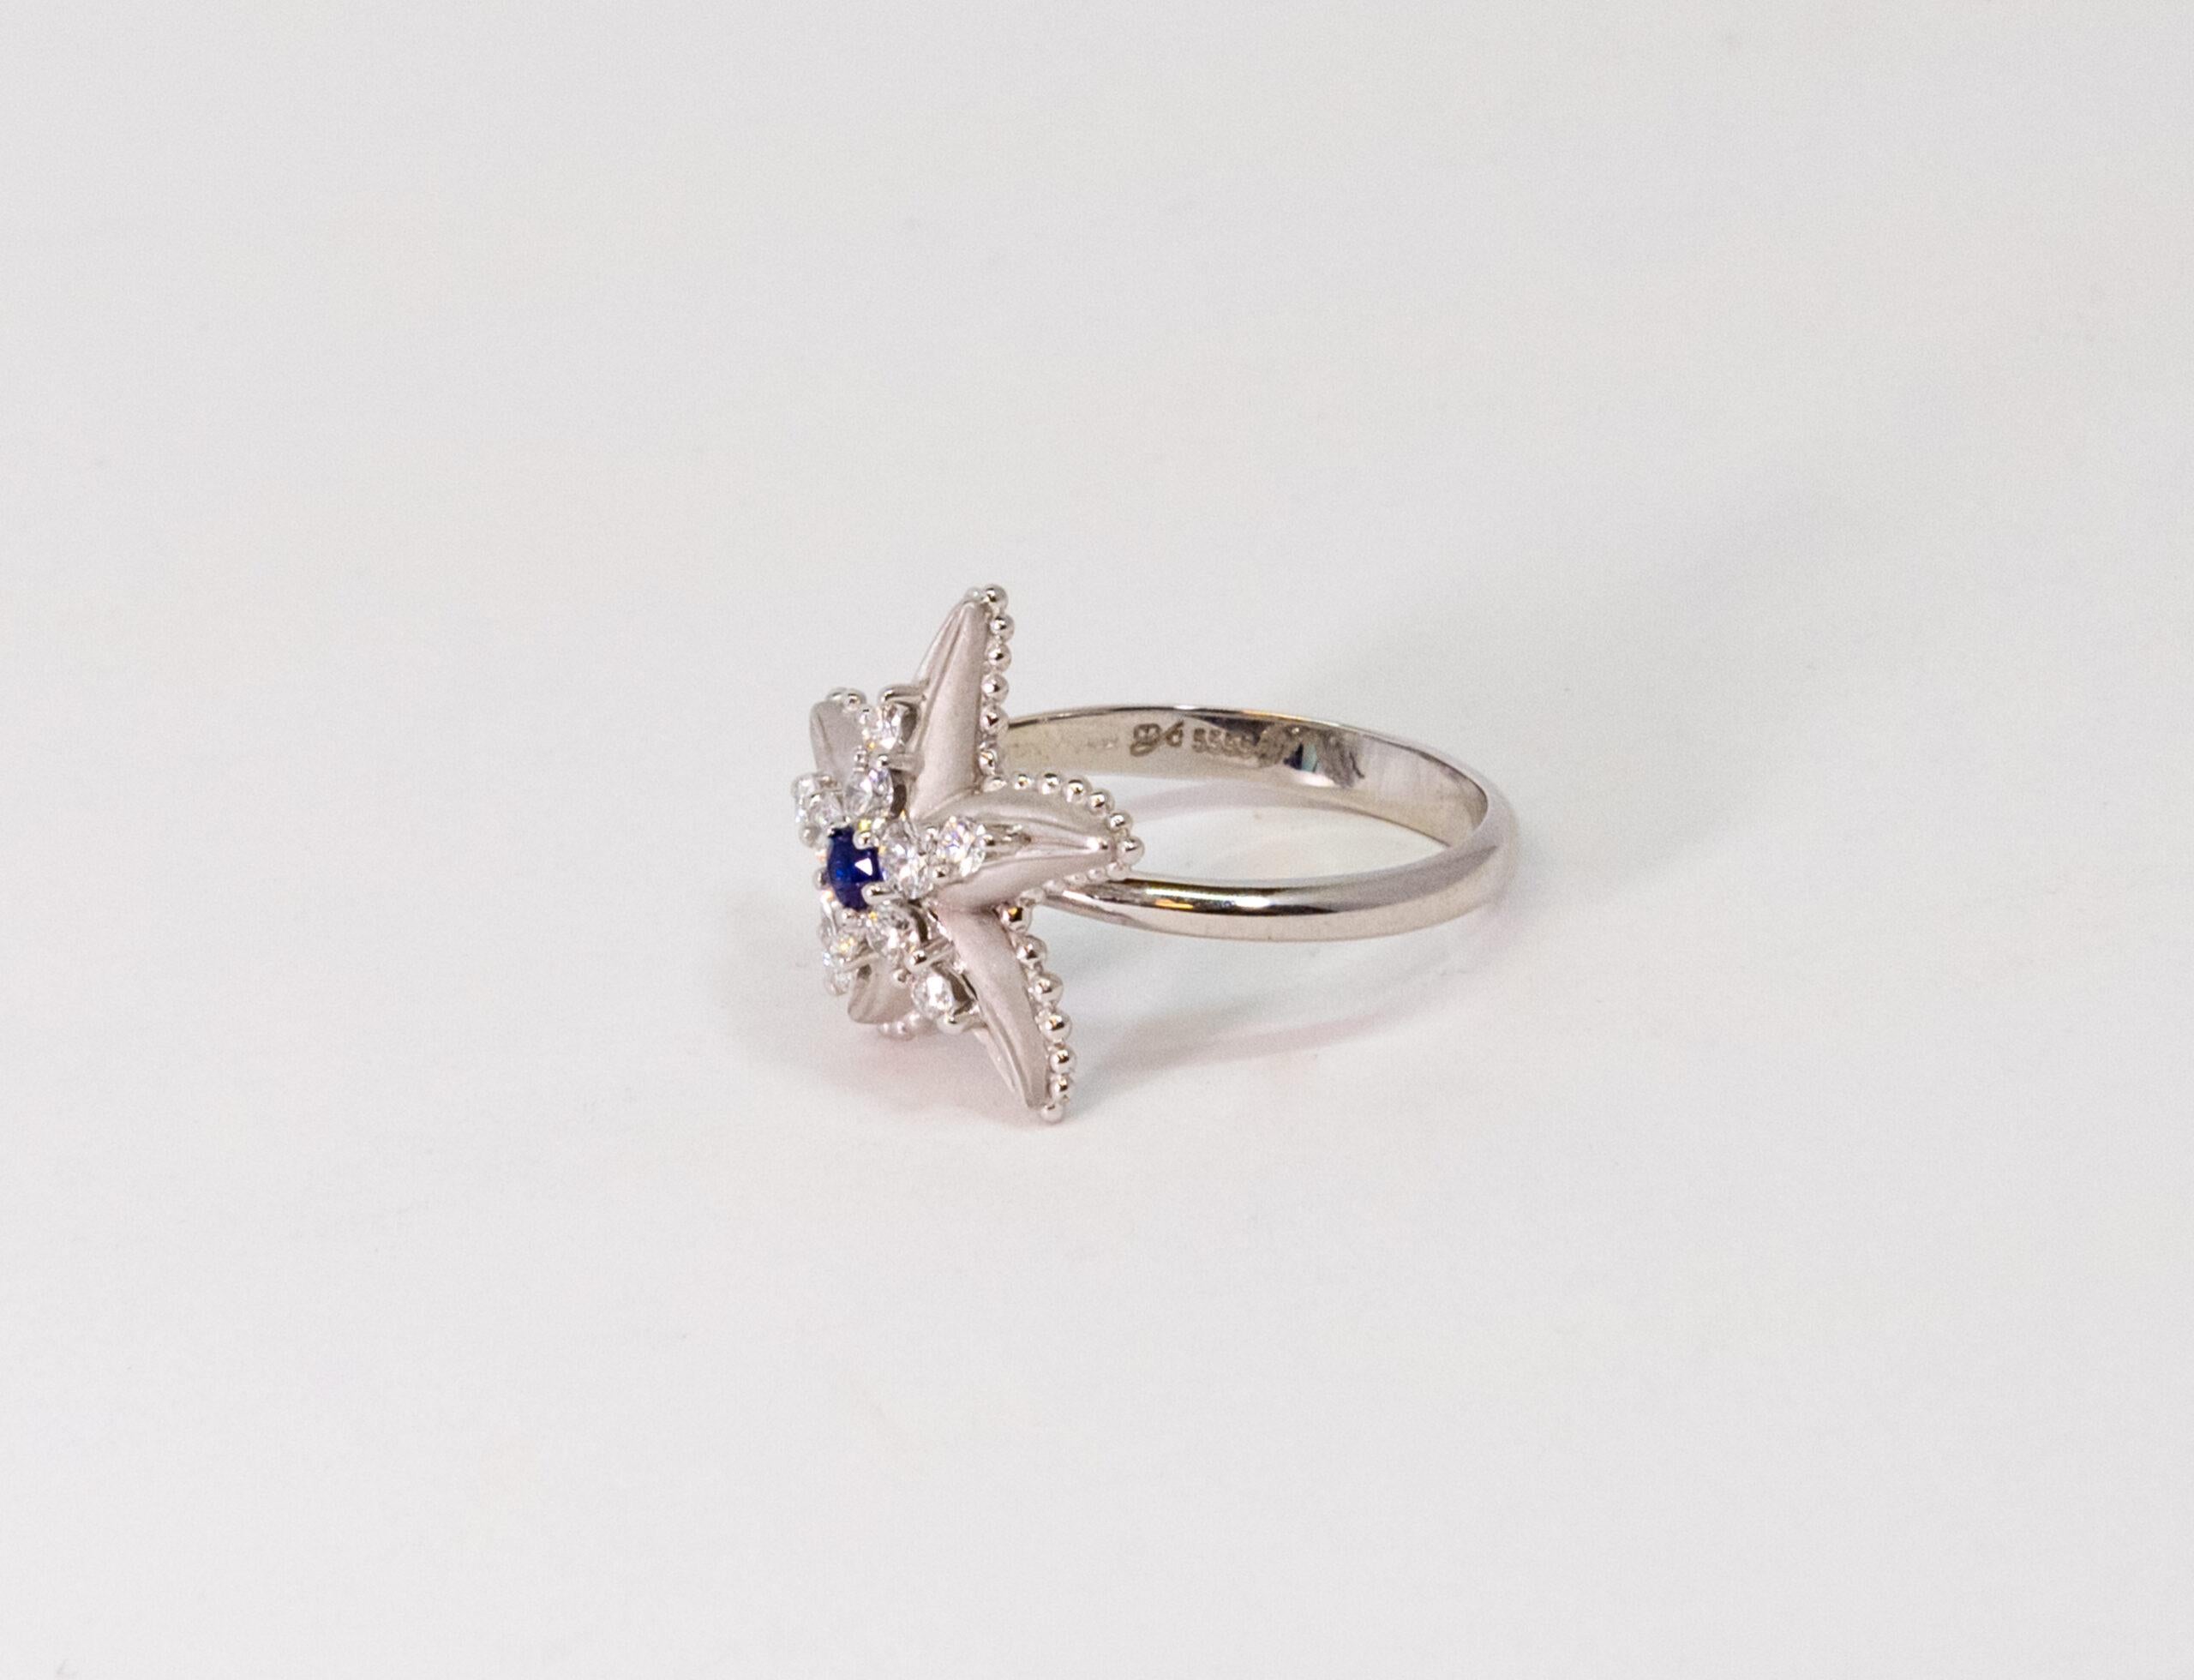 10076589 Carrara Y Carrara
This ring is made of 18K White Gold. The starfish-shaped front side is decorated with Blue Sapphire main stone (~0.09ct) and diamonds (~0.65).

Size – 52.2 (6 US)